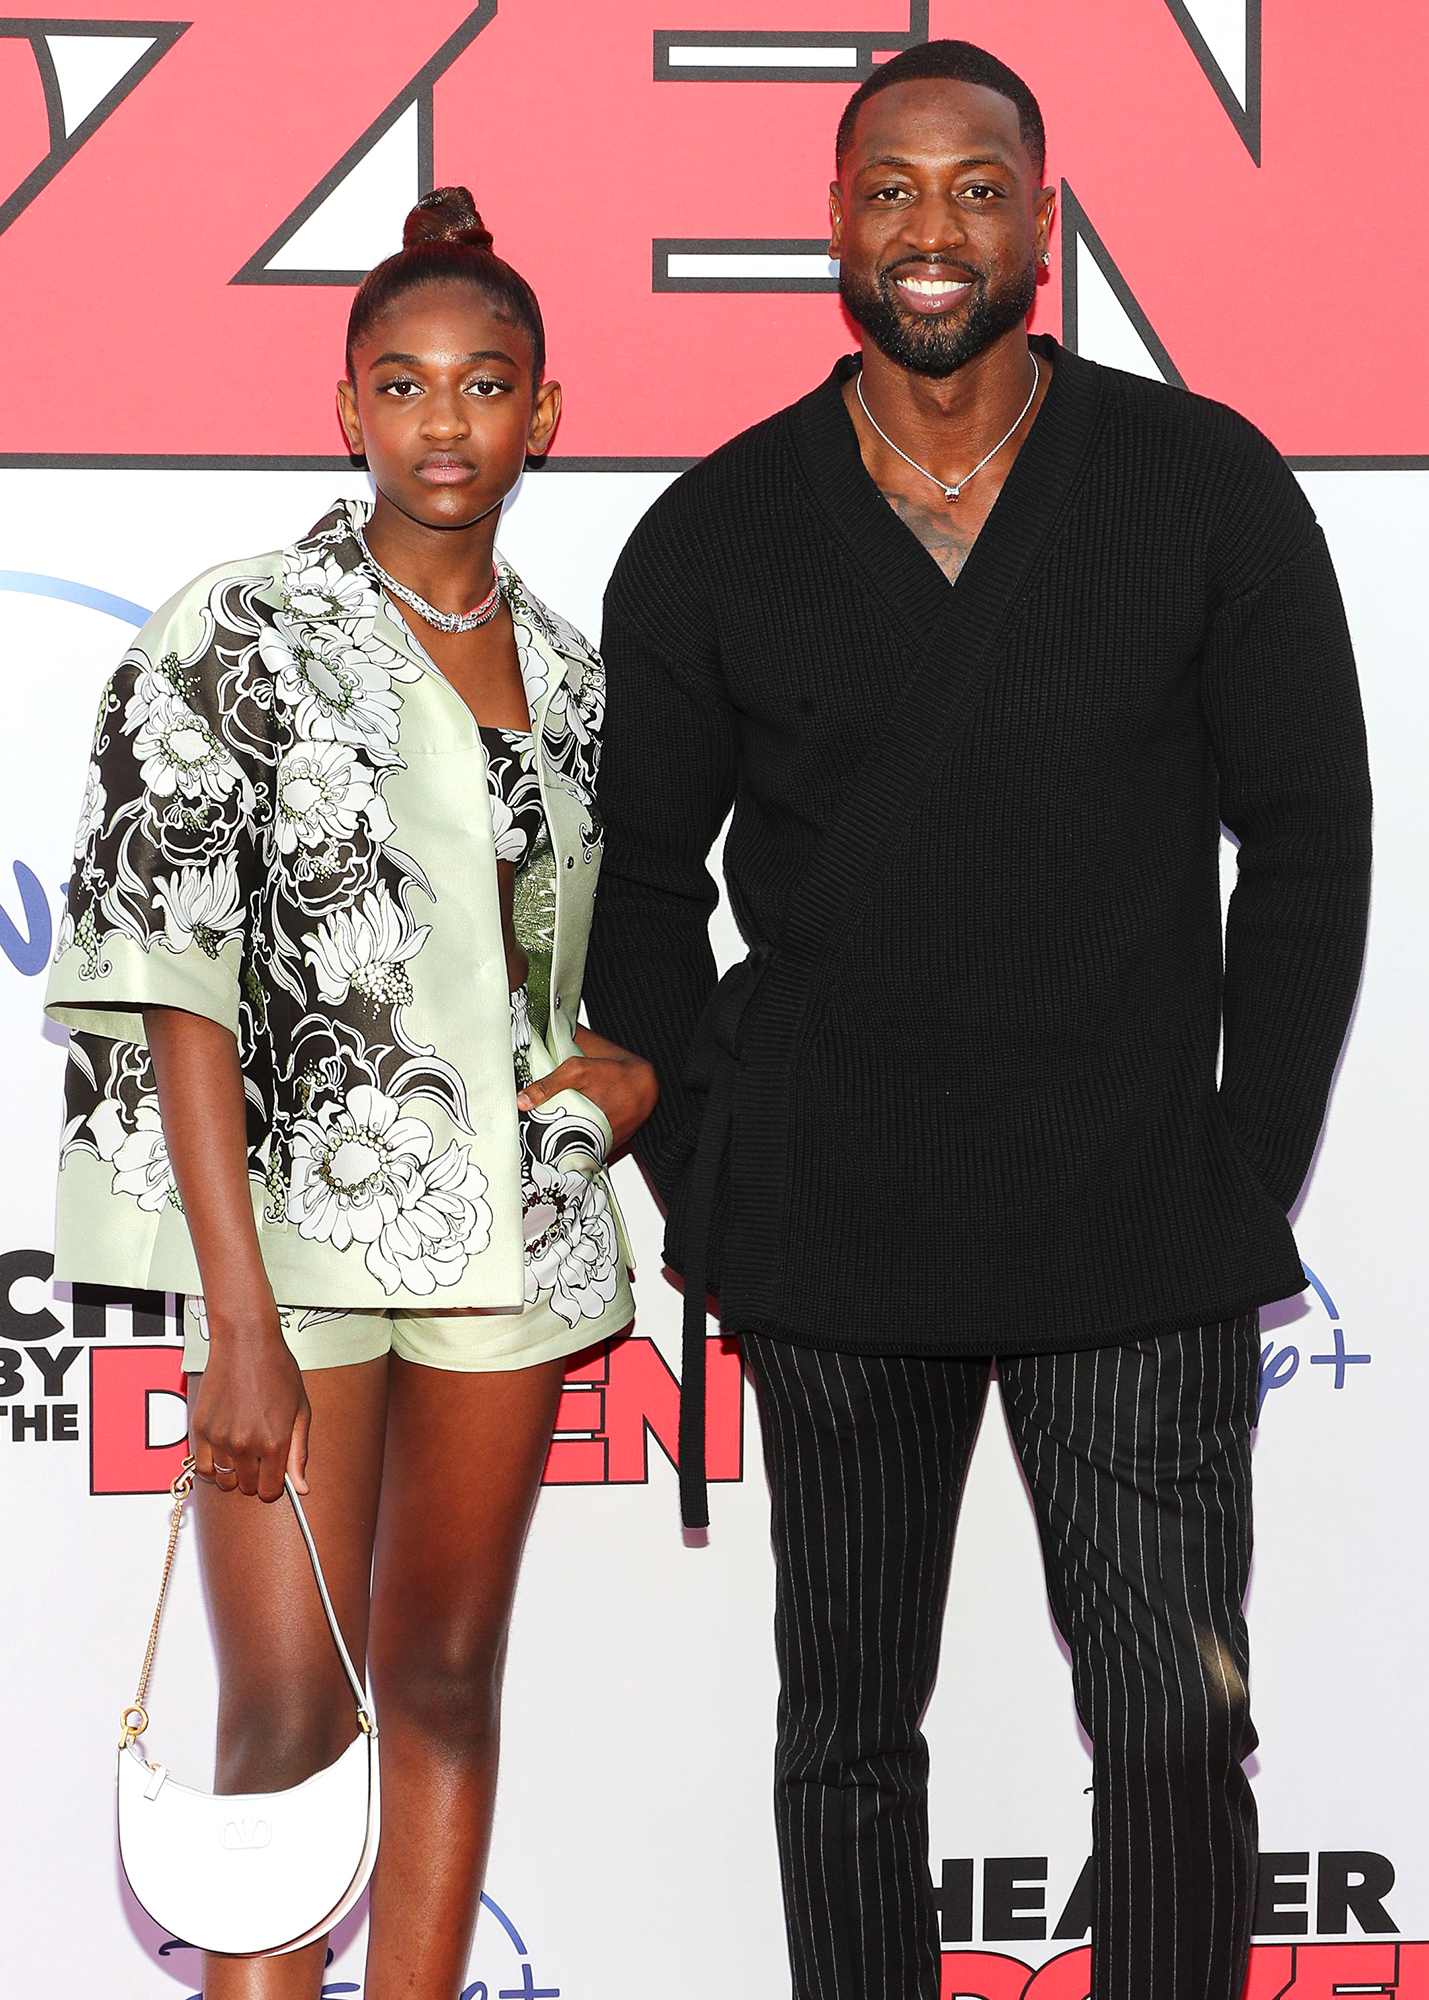 Dwayne Wade’s son granted gender change and new legal name